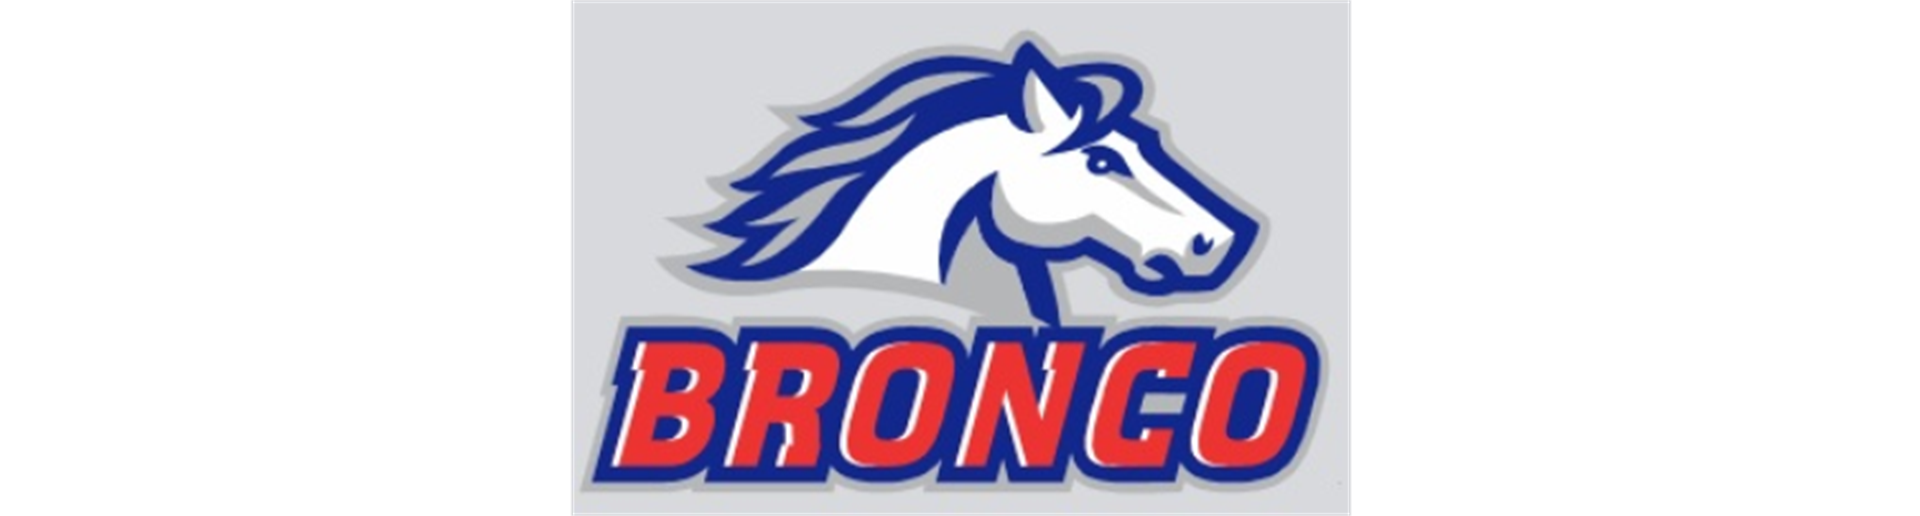 Bronco Standings and Schedule